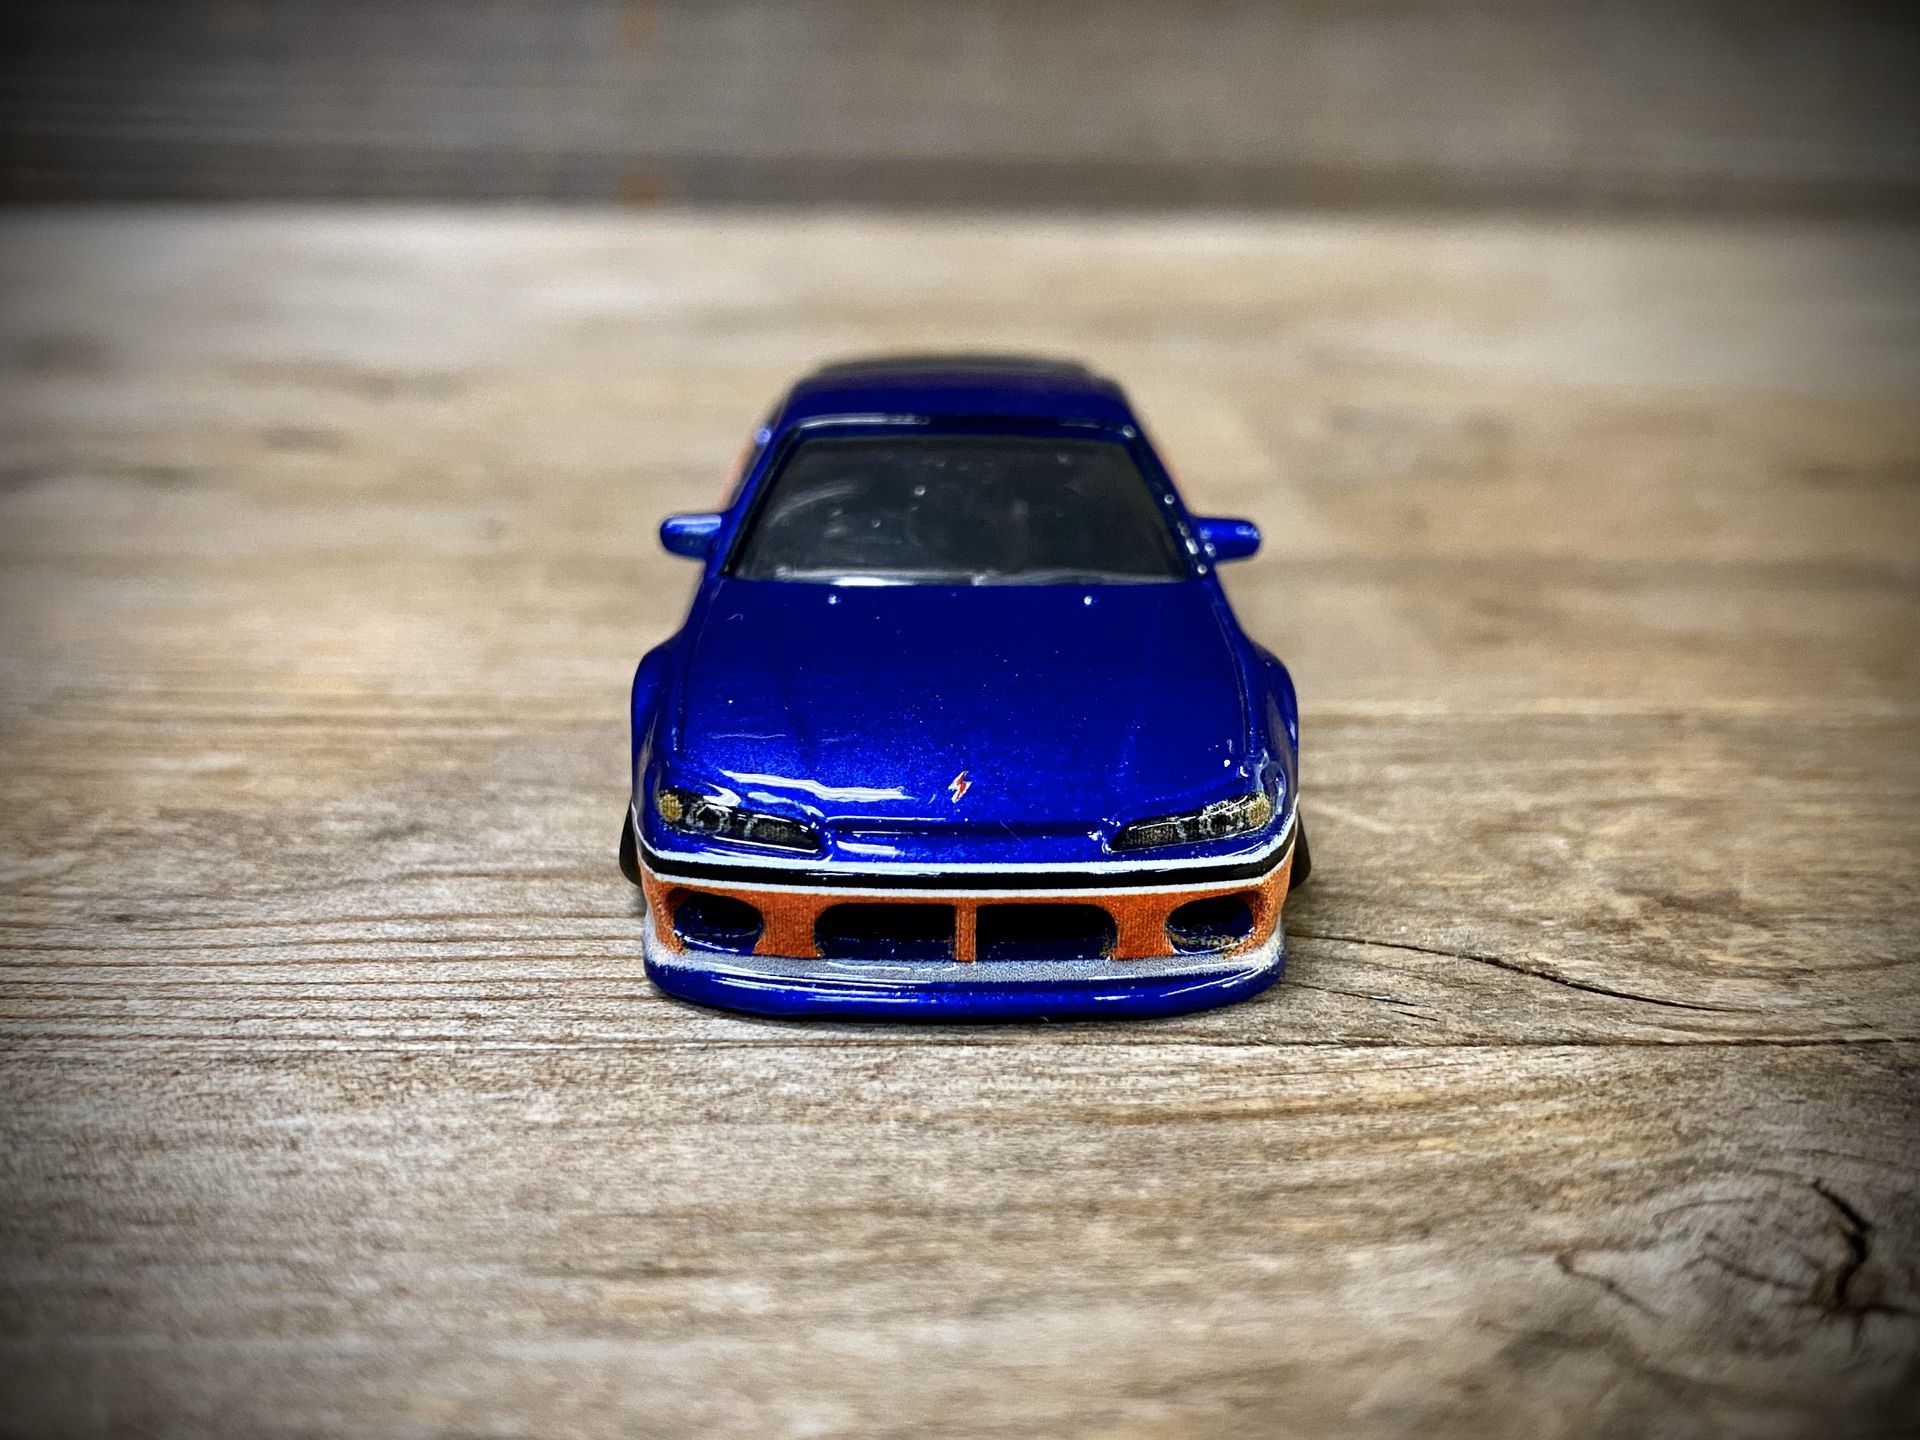 CUSTOM 1:64 Nissan Sylvia S15 “Mona Lisa” - Hot Wheels x Fast and Furious (Lowered+camber with upgraded premium 6-spoke white wheels with chrome lip)